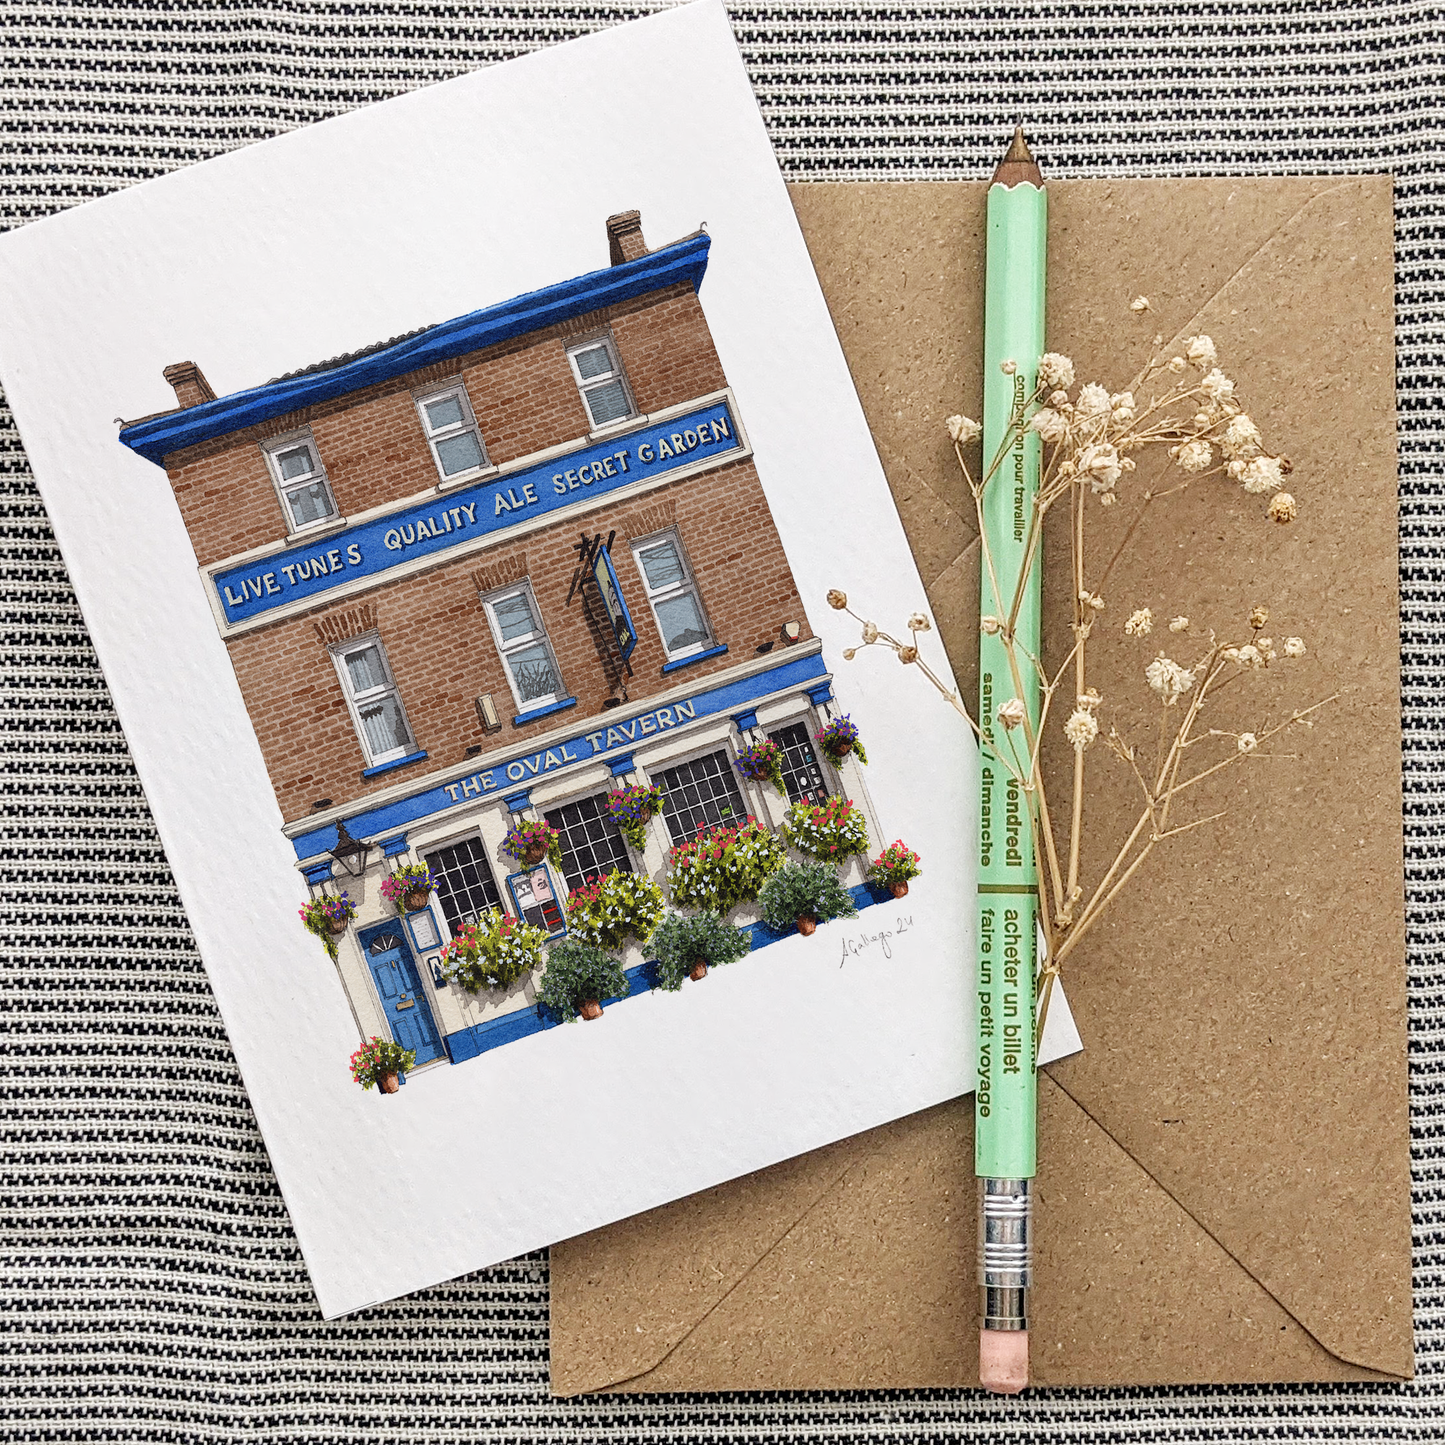 Croydon - The Oval Tavern - Greeting card with envelope